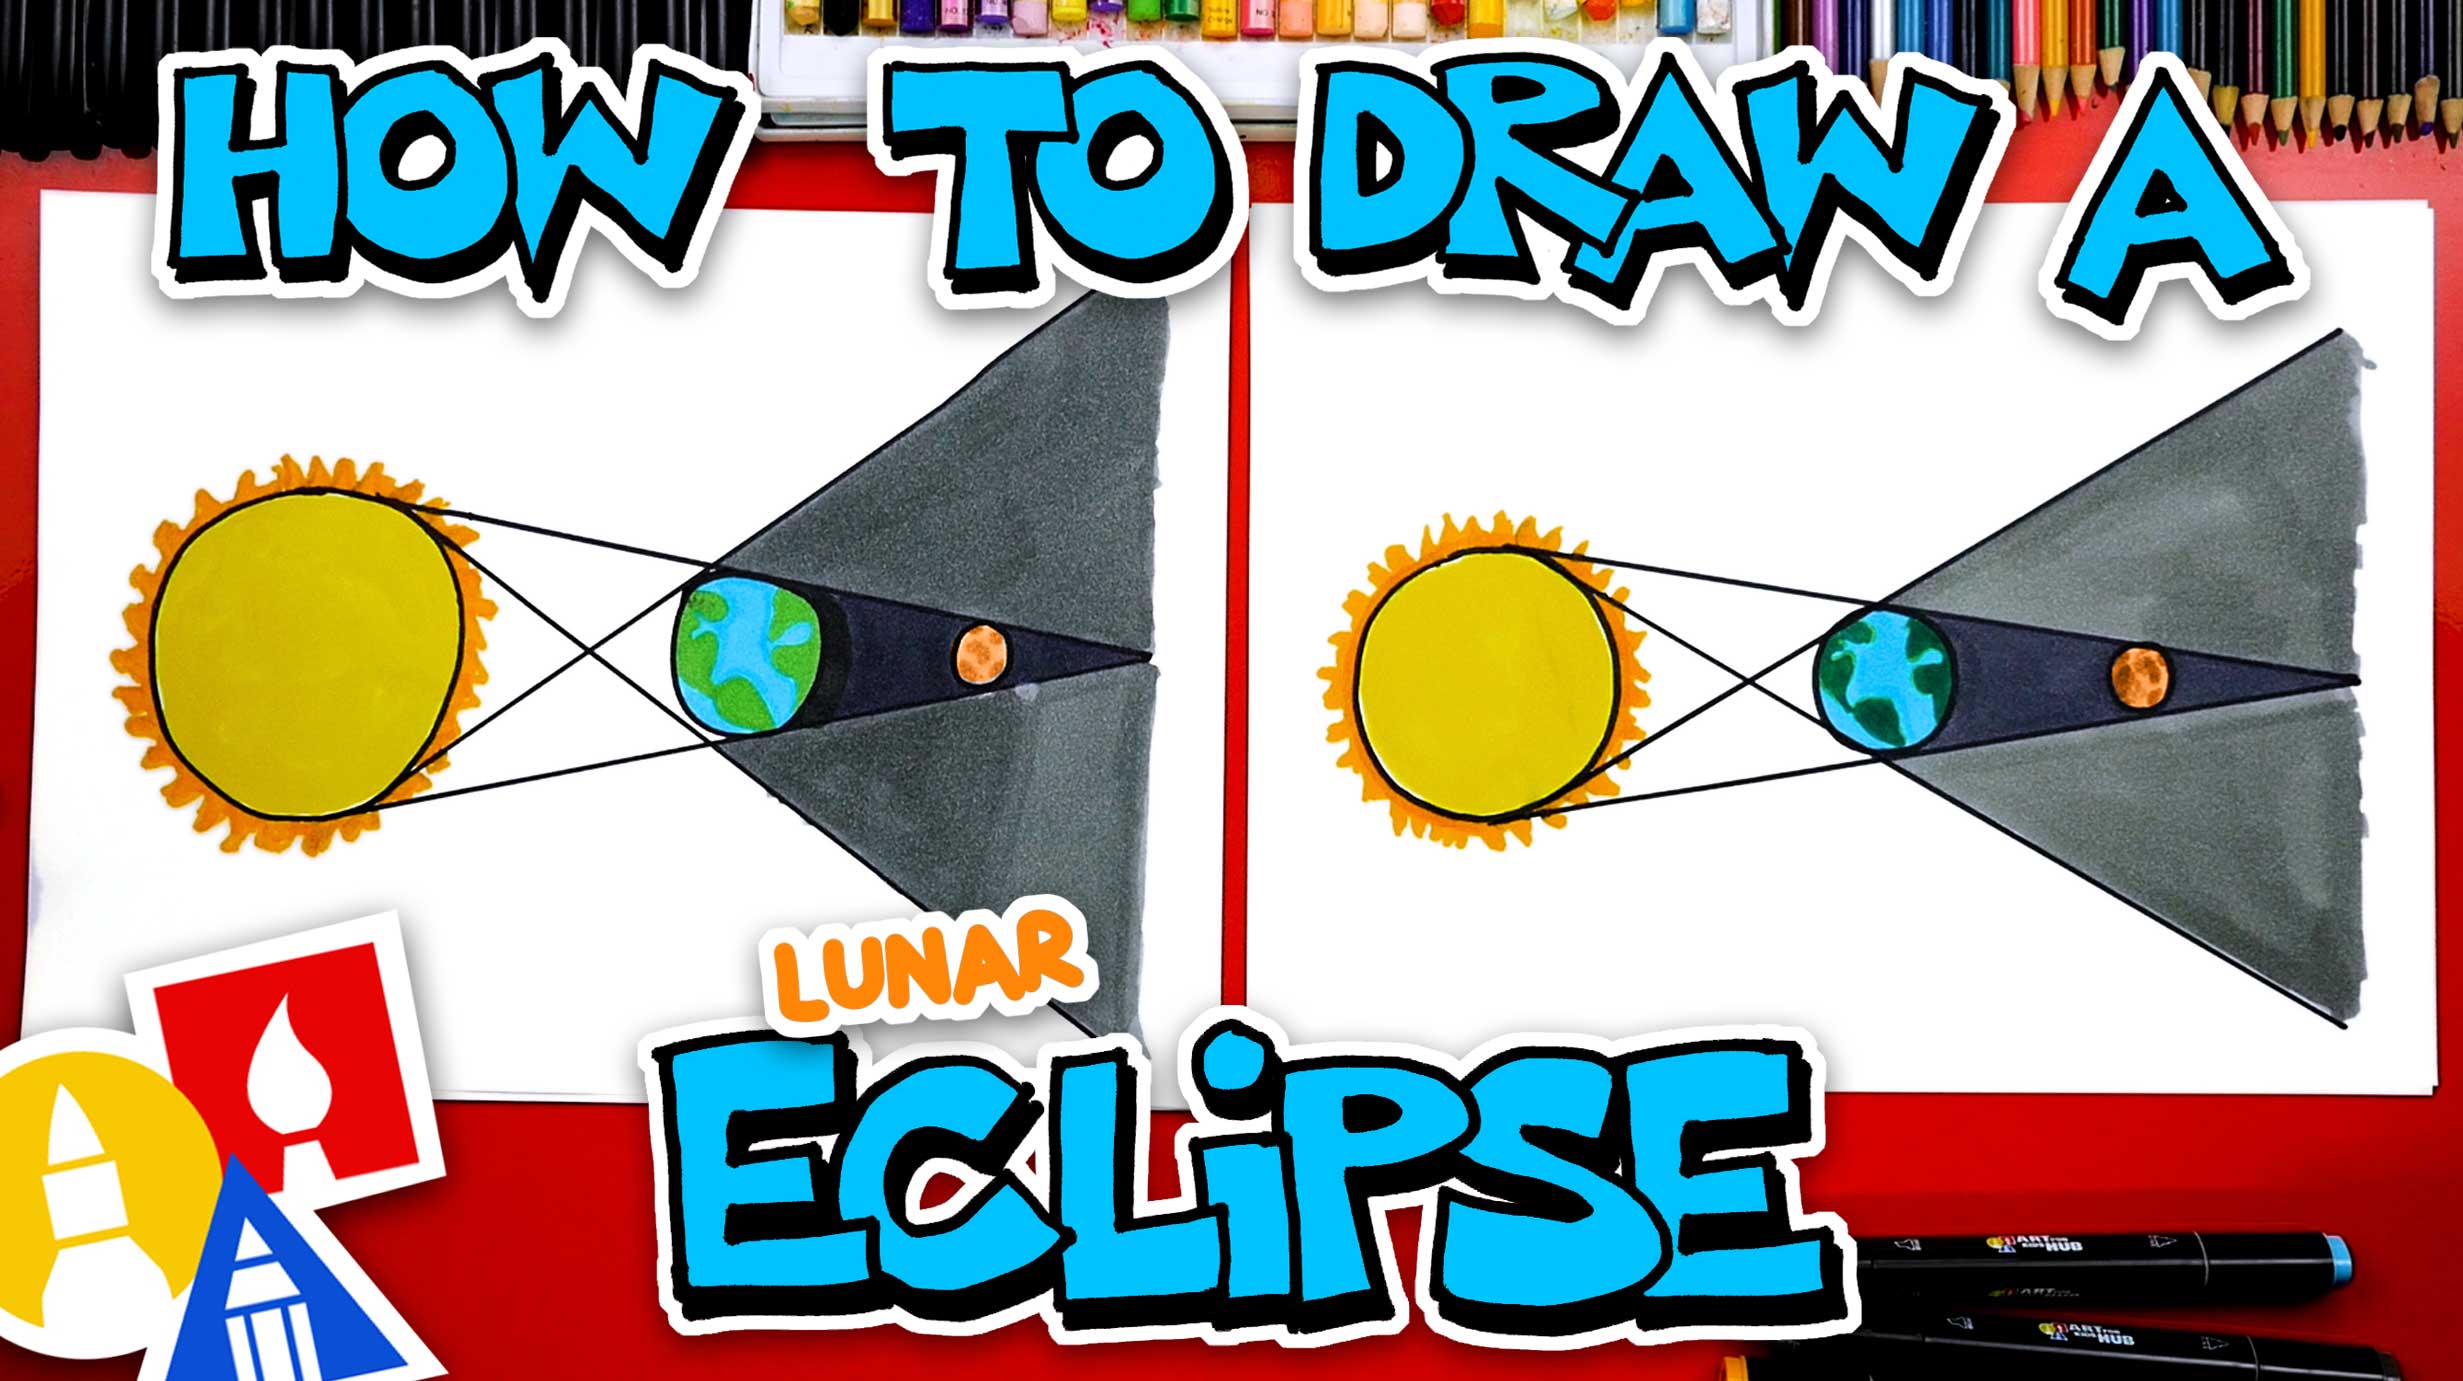 How To Draw A Lunar Eclipse Diagram: Step-by-Step Drawing Guide for Kids -  Art For Kids Hub 